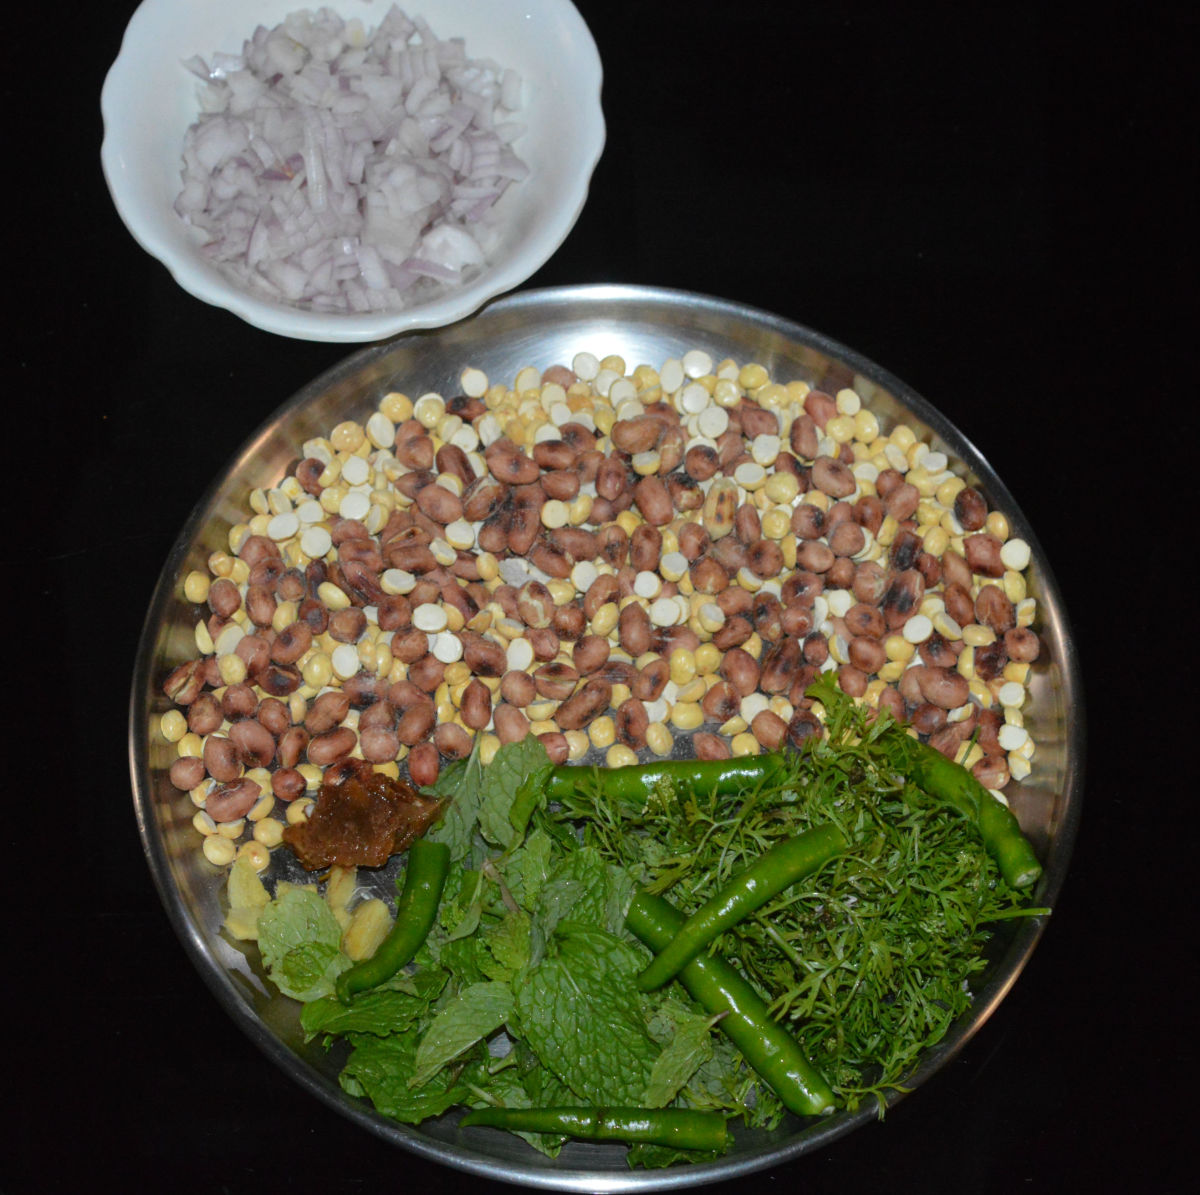 The ingredients for making peanut and fried gram chutney